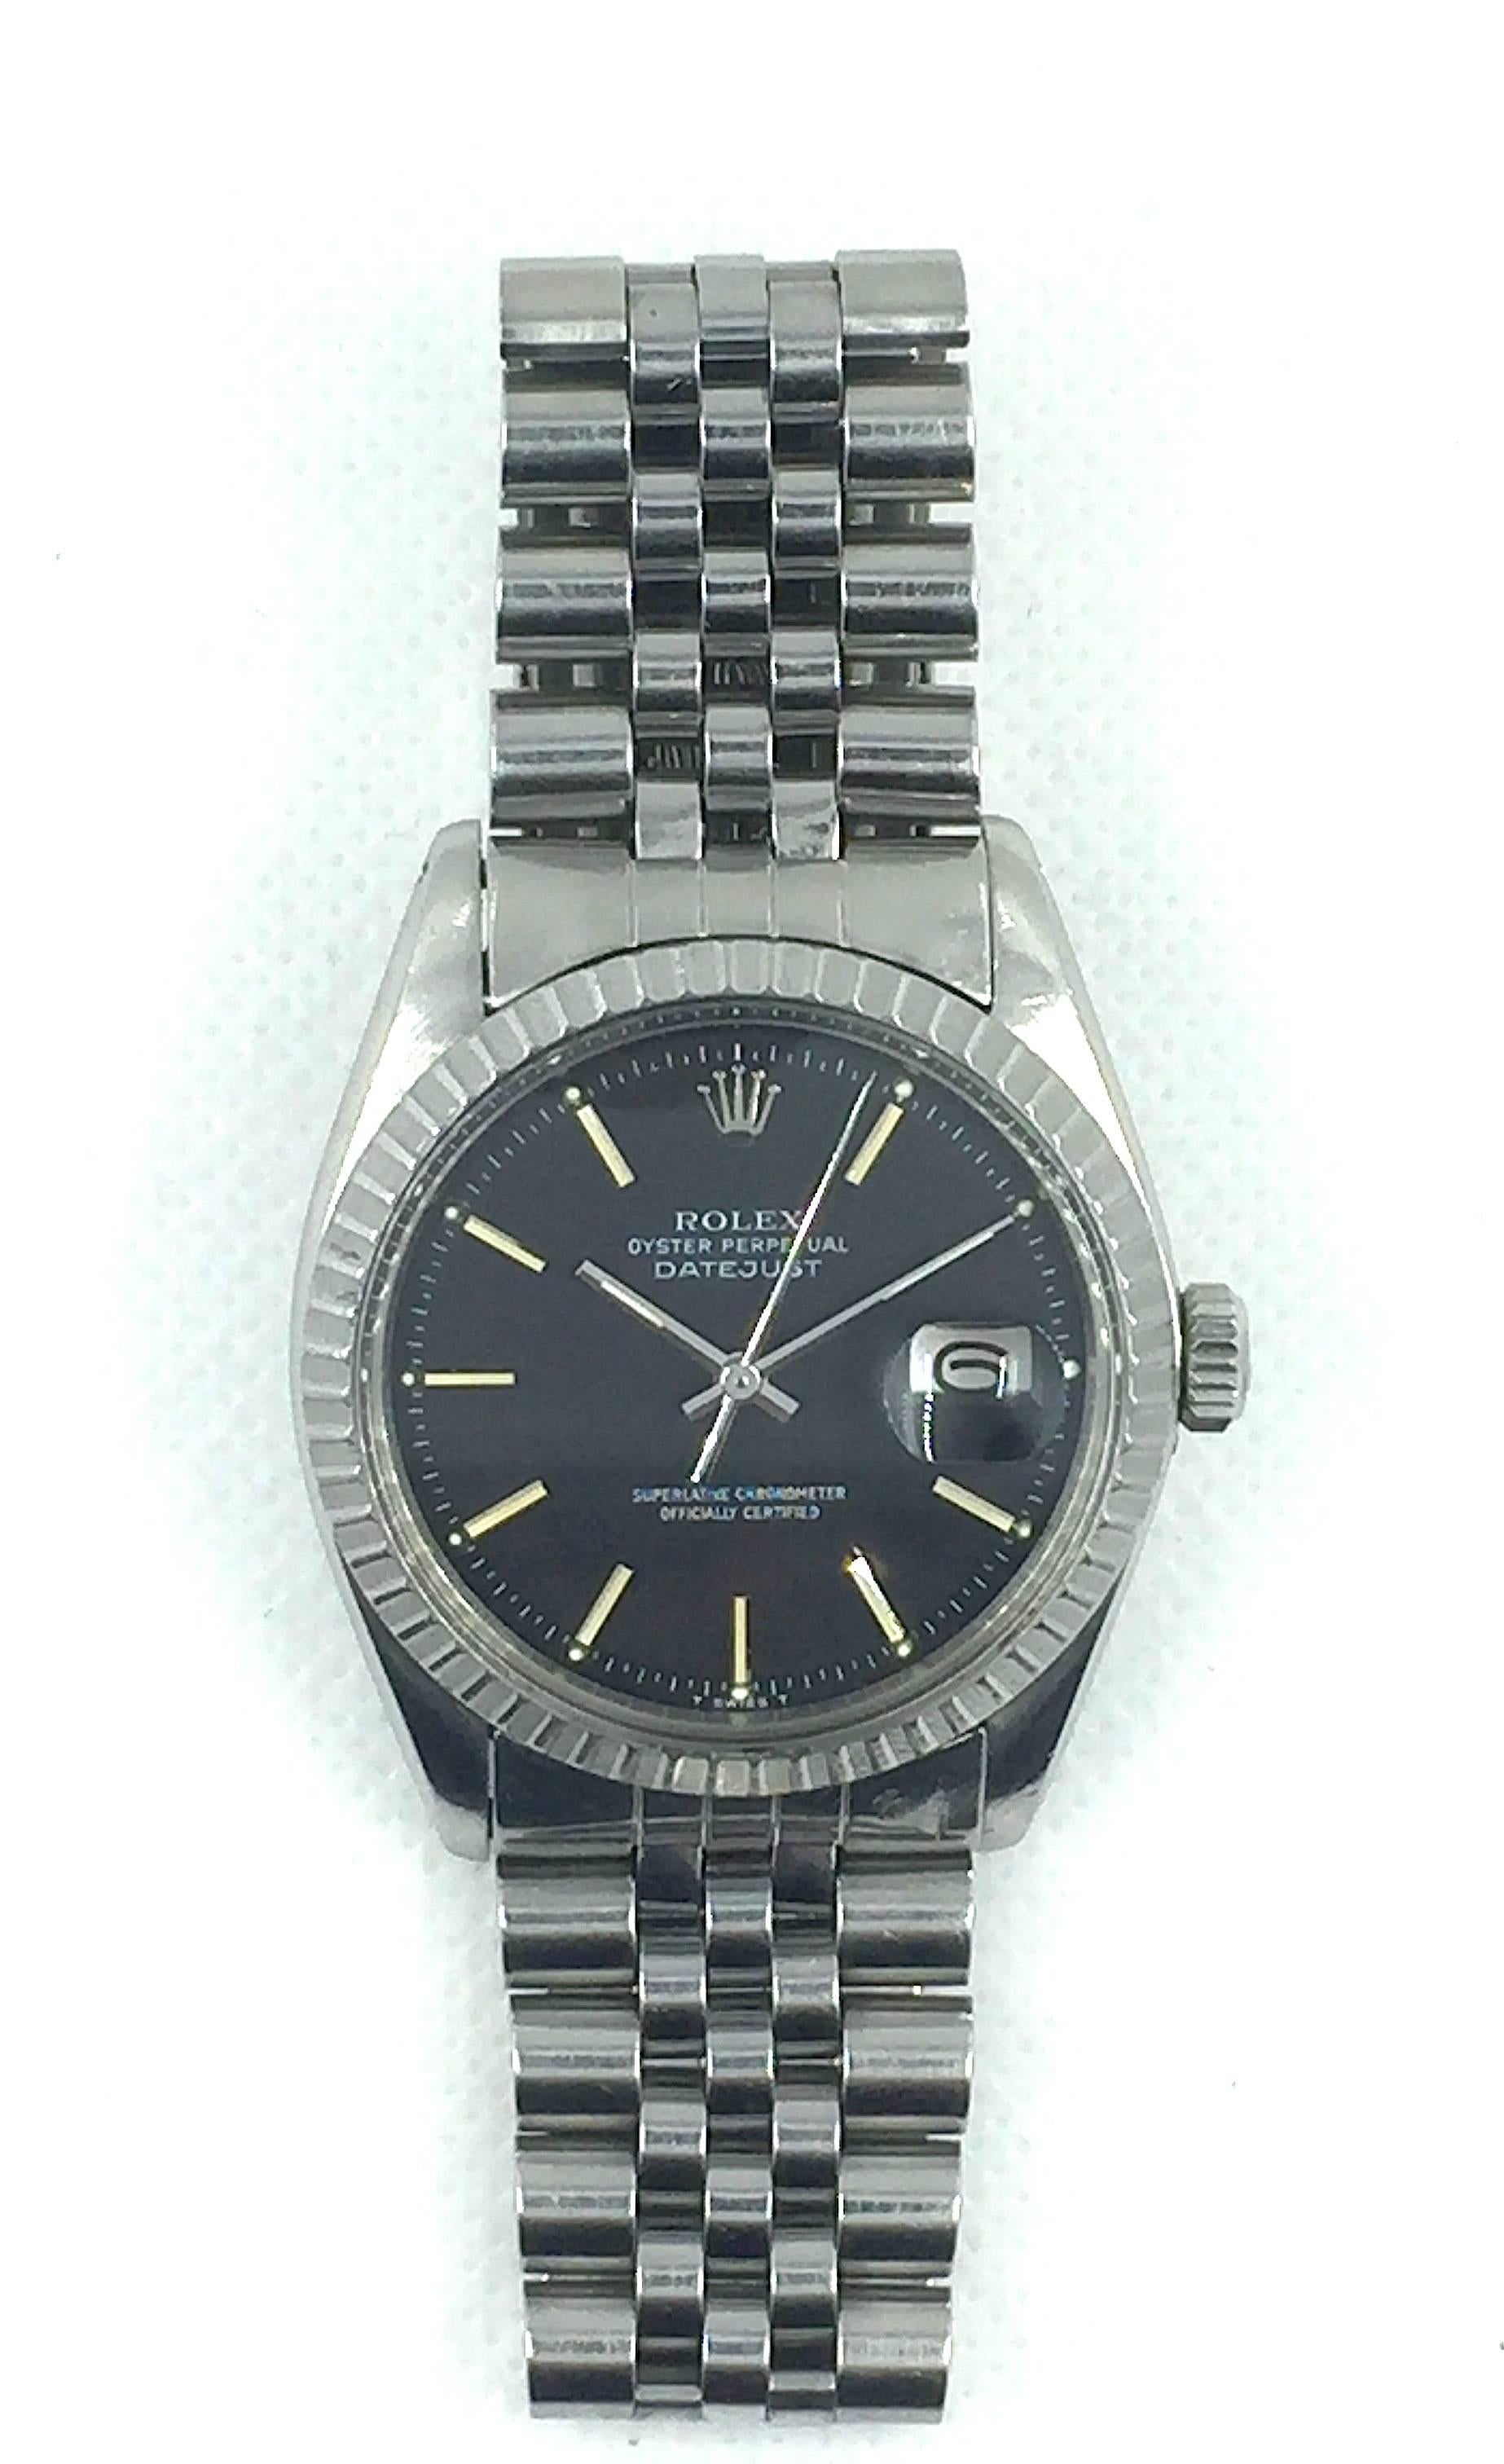 Rolex Stainless Steel Oyster Perpetual Datejust Wristwatch
Factory Black Matte Dial with Applied Bi-Tonal Hour Markers
Stainless Steel Engine-Turned Bezel
36mm in size 
Rolex Calibre Base 1500 Automatic Movement
Acrylic Crystal
Late 1970's